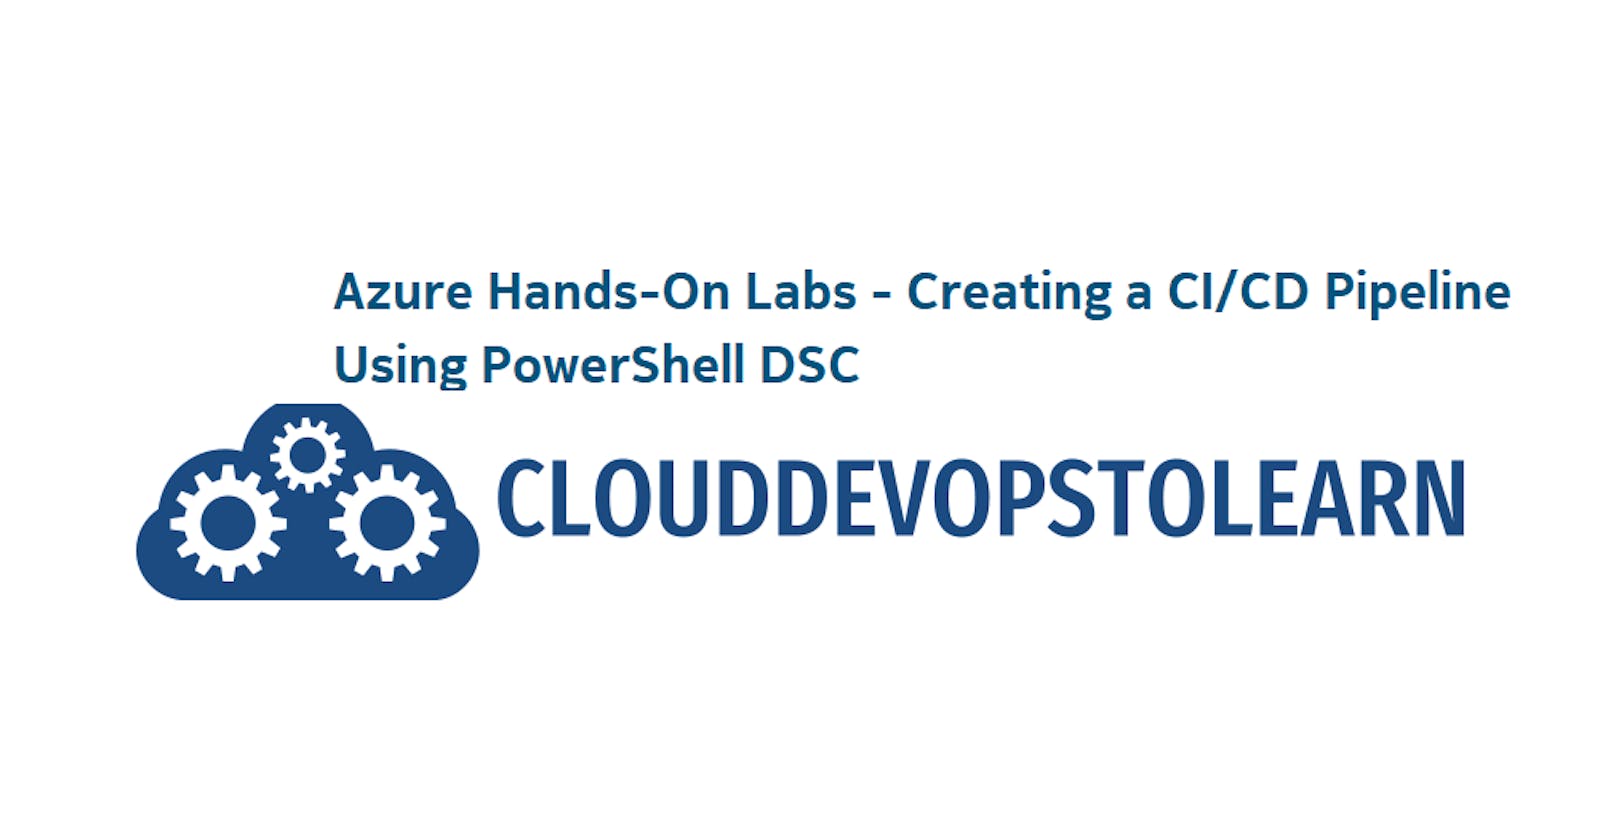 Azure Hands-On Labs - Creating a CI/CD Pipeline Using PowerShell DSC